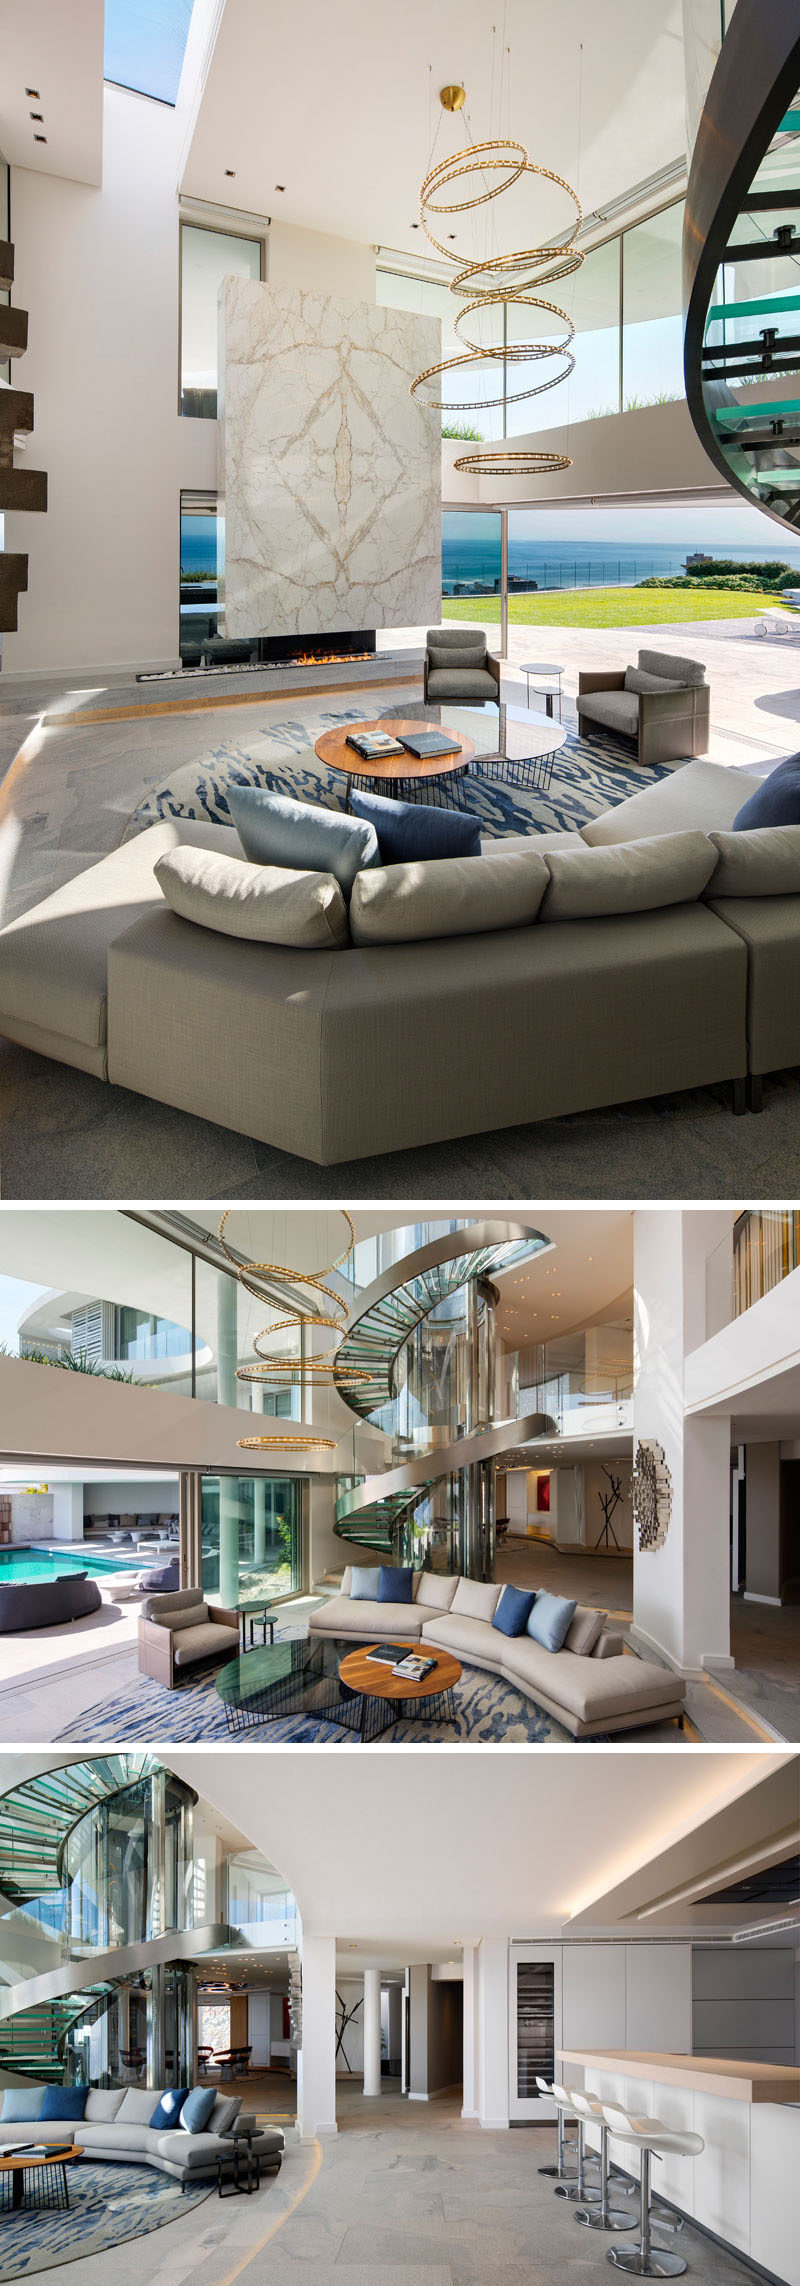 Inside this modern house, there's a living room with a double height ceiling. Throughout the interior, white marble, granite, brushed stainless steel and bronze elements have been included to contrast the white walls that are ever present throughout the house. #LivingRoom #ModernLivingRoom #InteriorDesign #SpiralStaircase